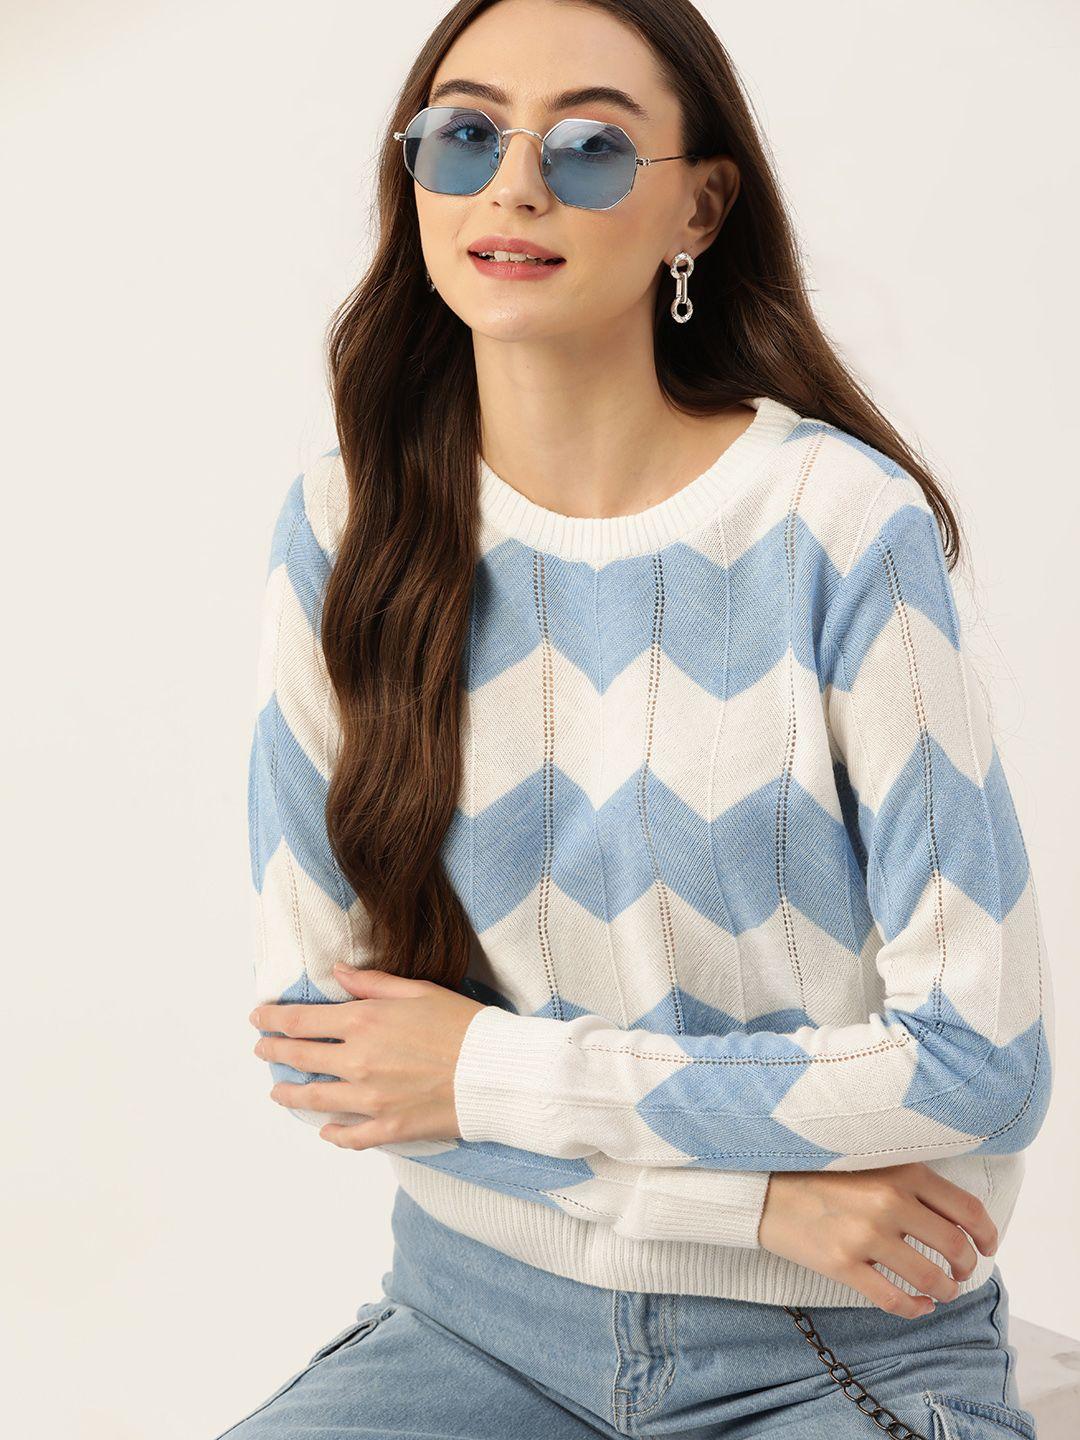 dressberry women acrylic chevron patterned pullover